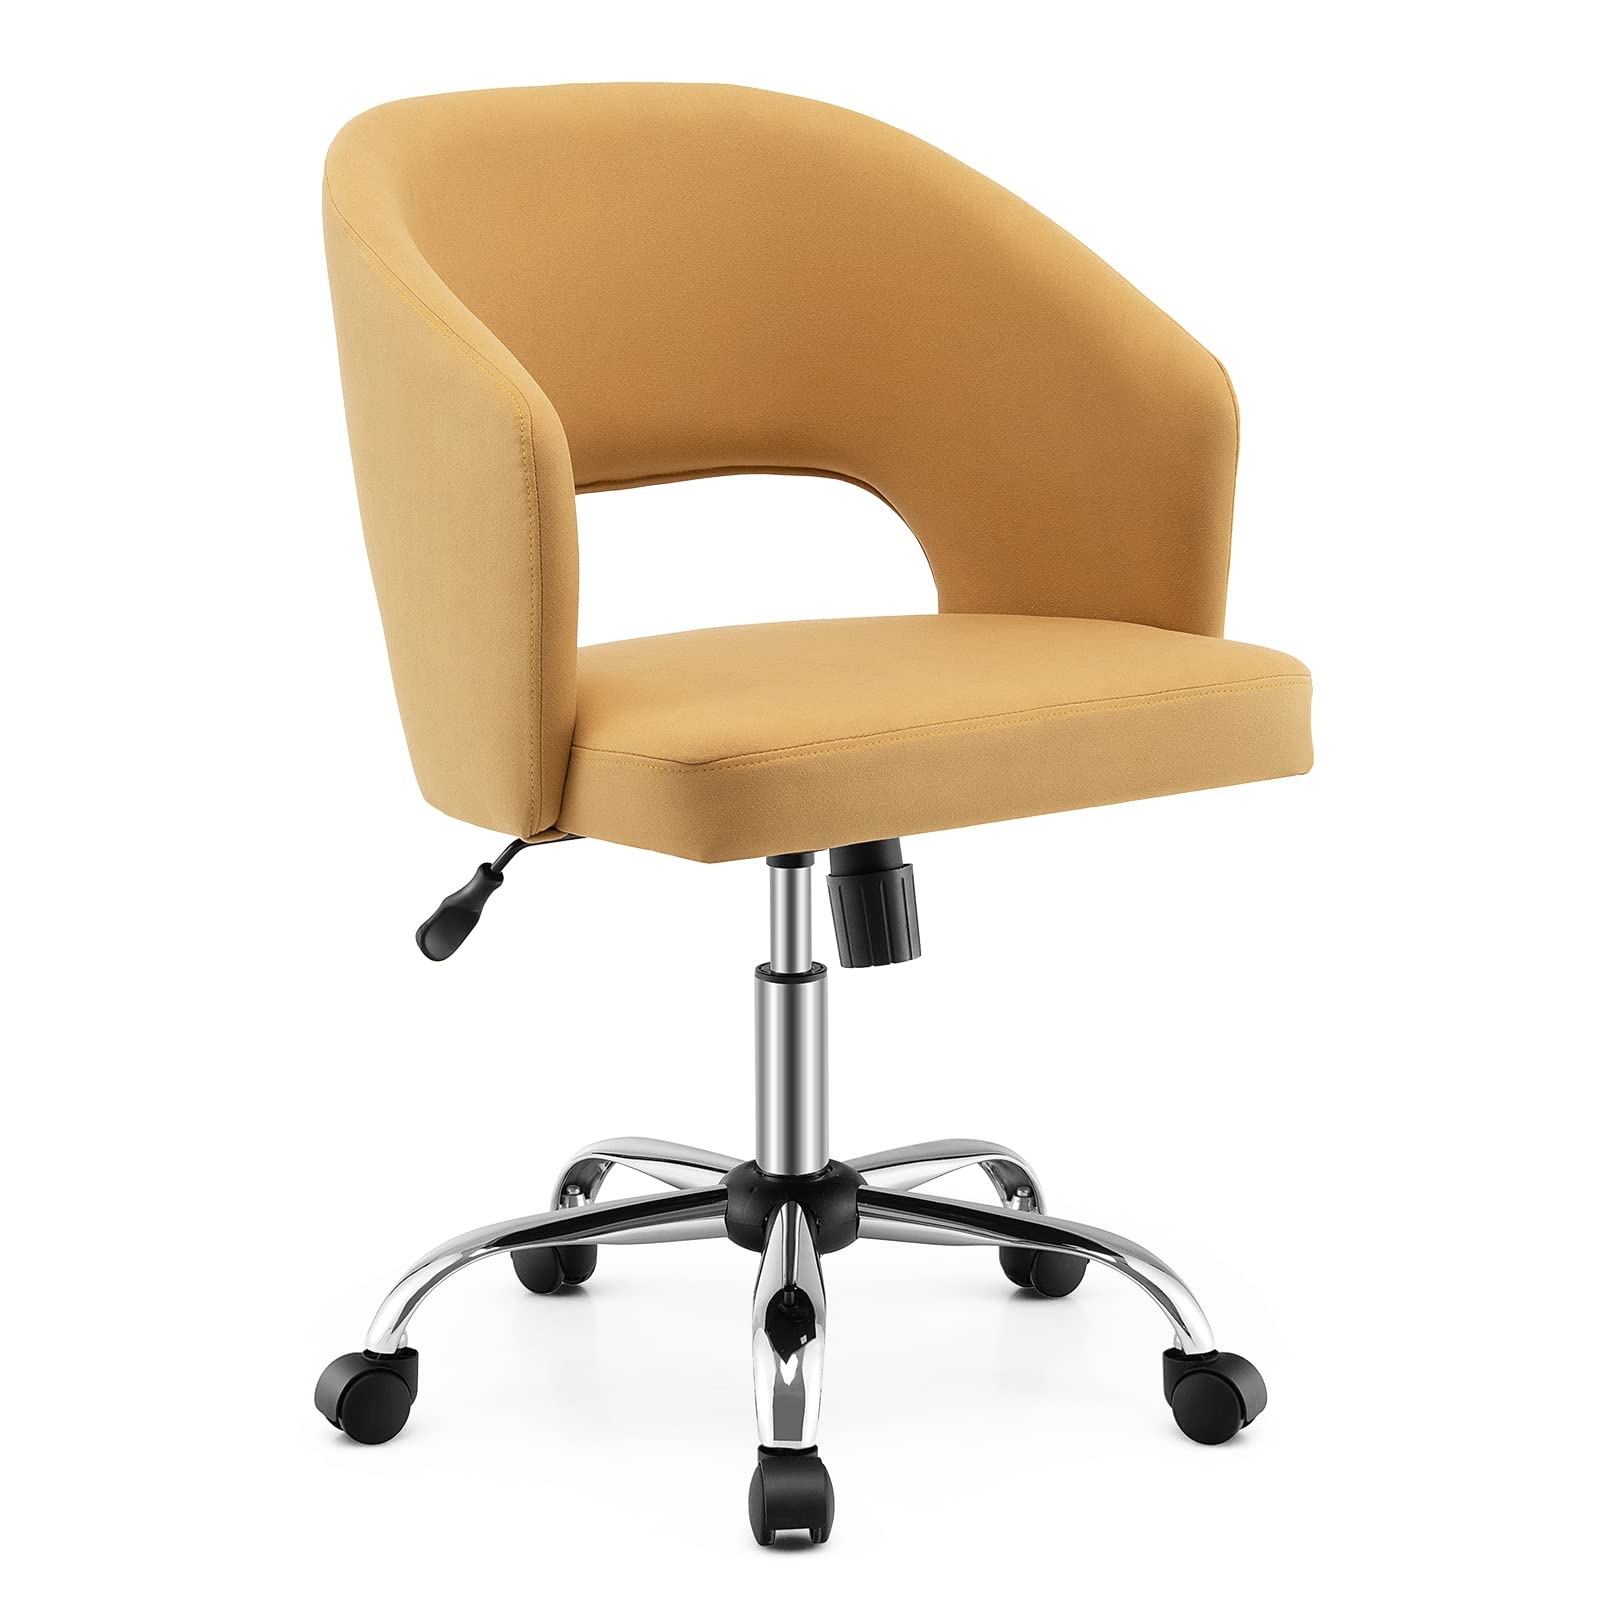 Giantex Home Office Desk Chair, Mid Back Swivel Chair with Hollow Design & Height Adjustable (Yellow)